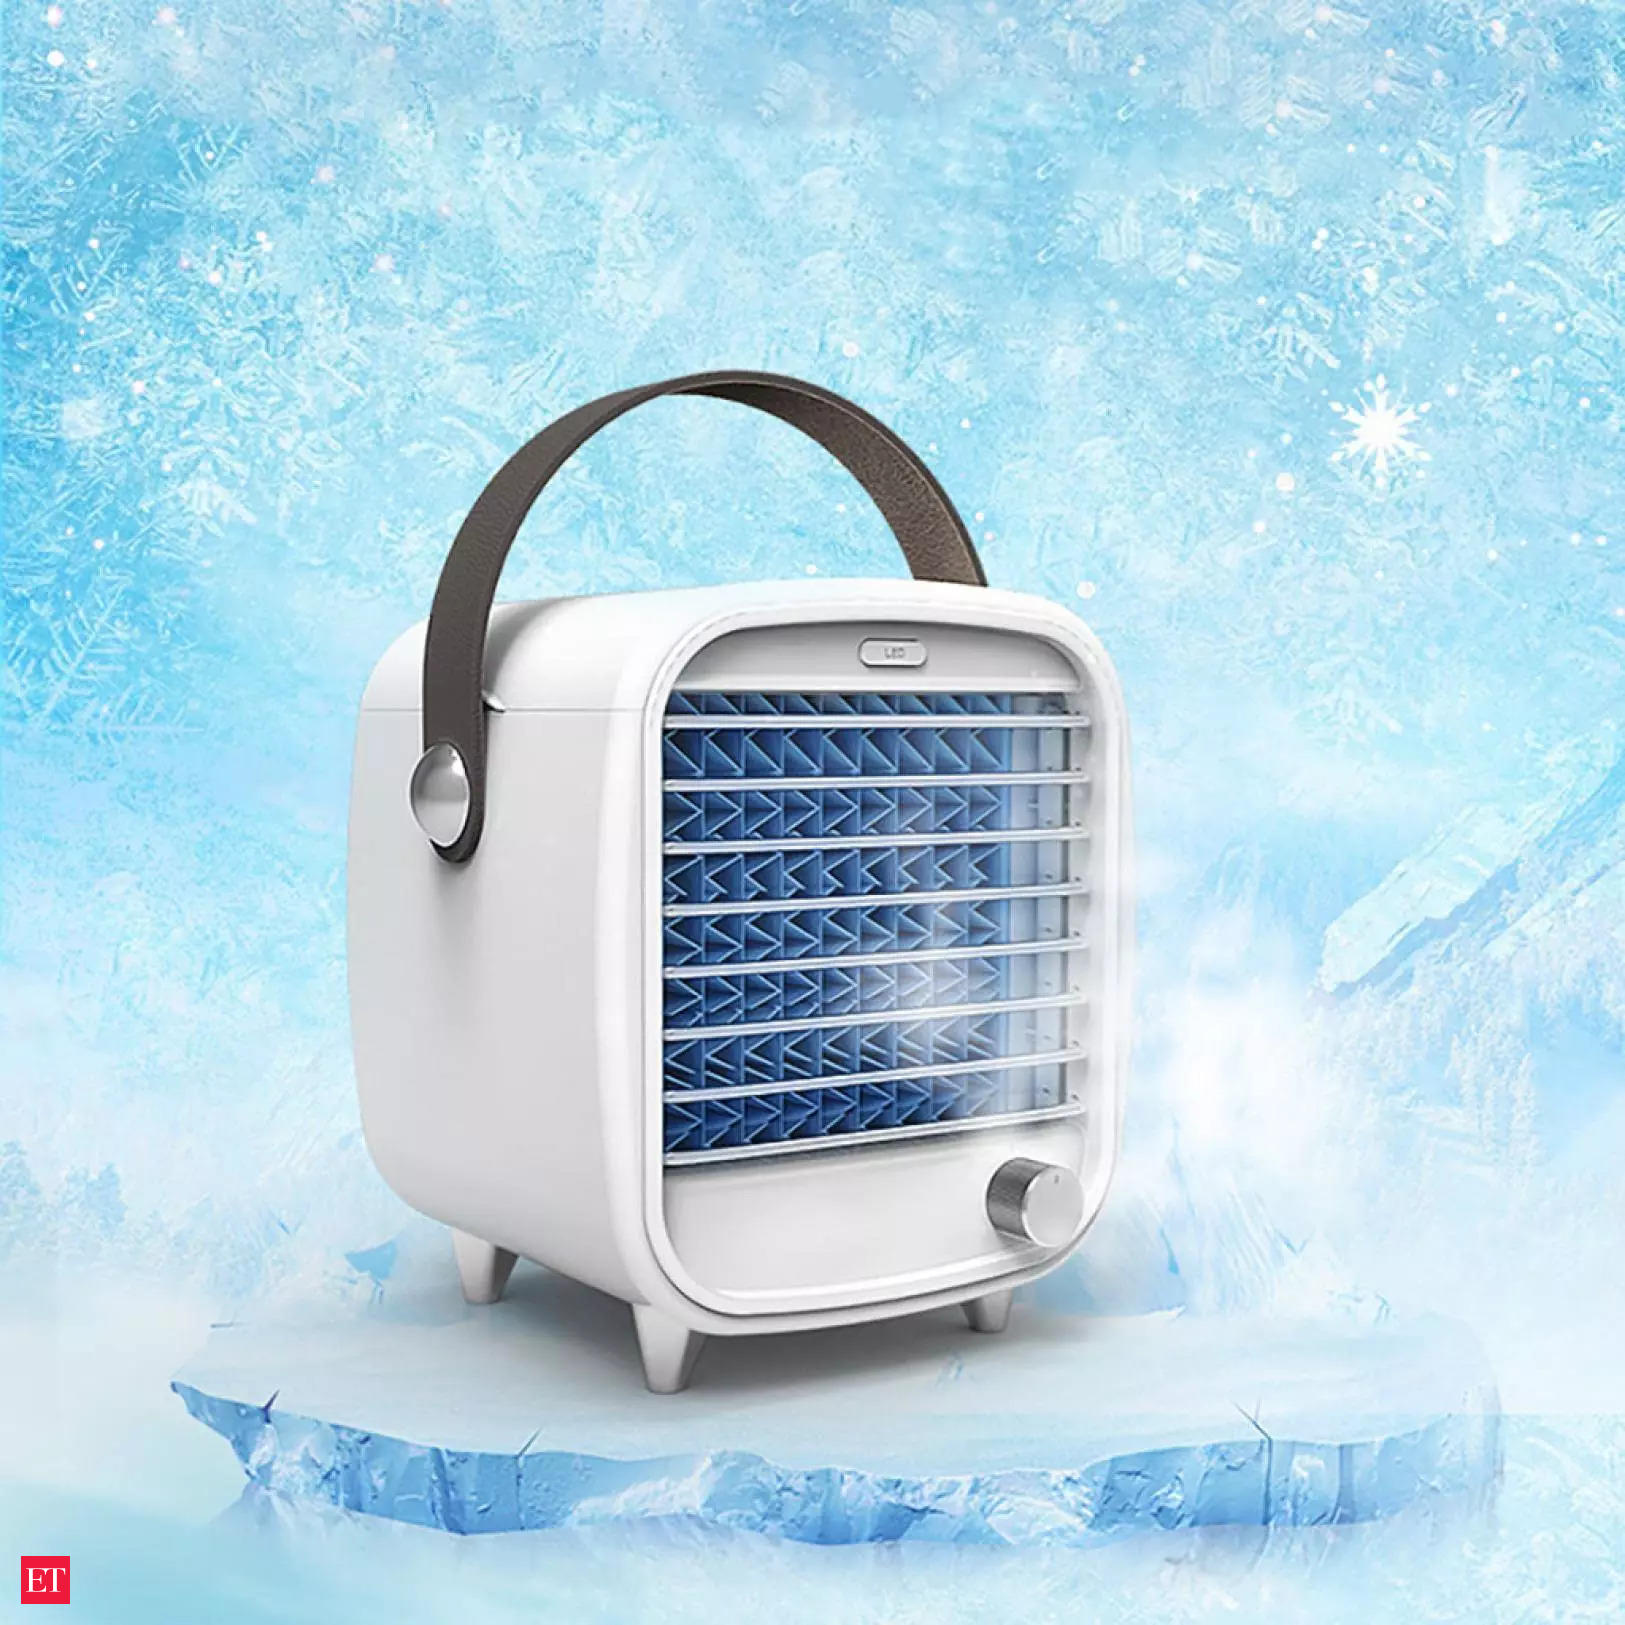 Portable AC: Don't Suffer through the Summer - get a Portable AC and Stay Cool under 15000 - The Economic Times